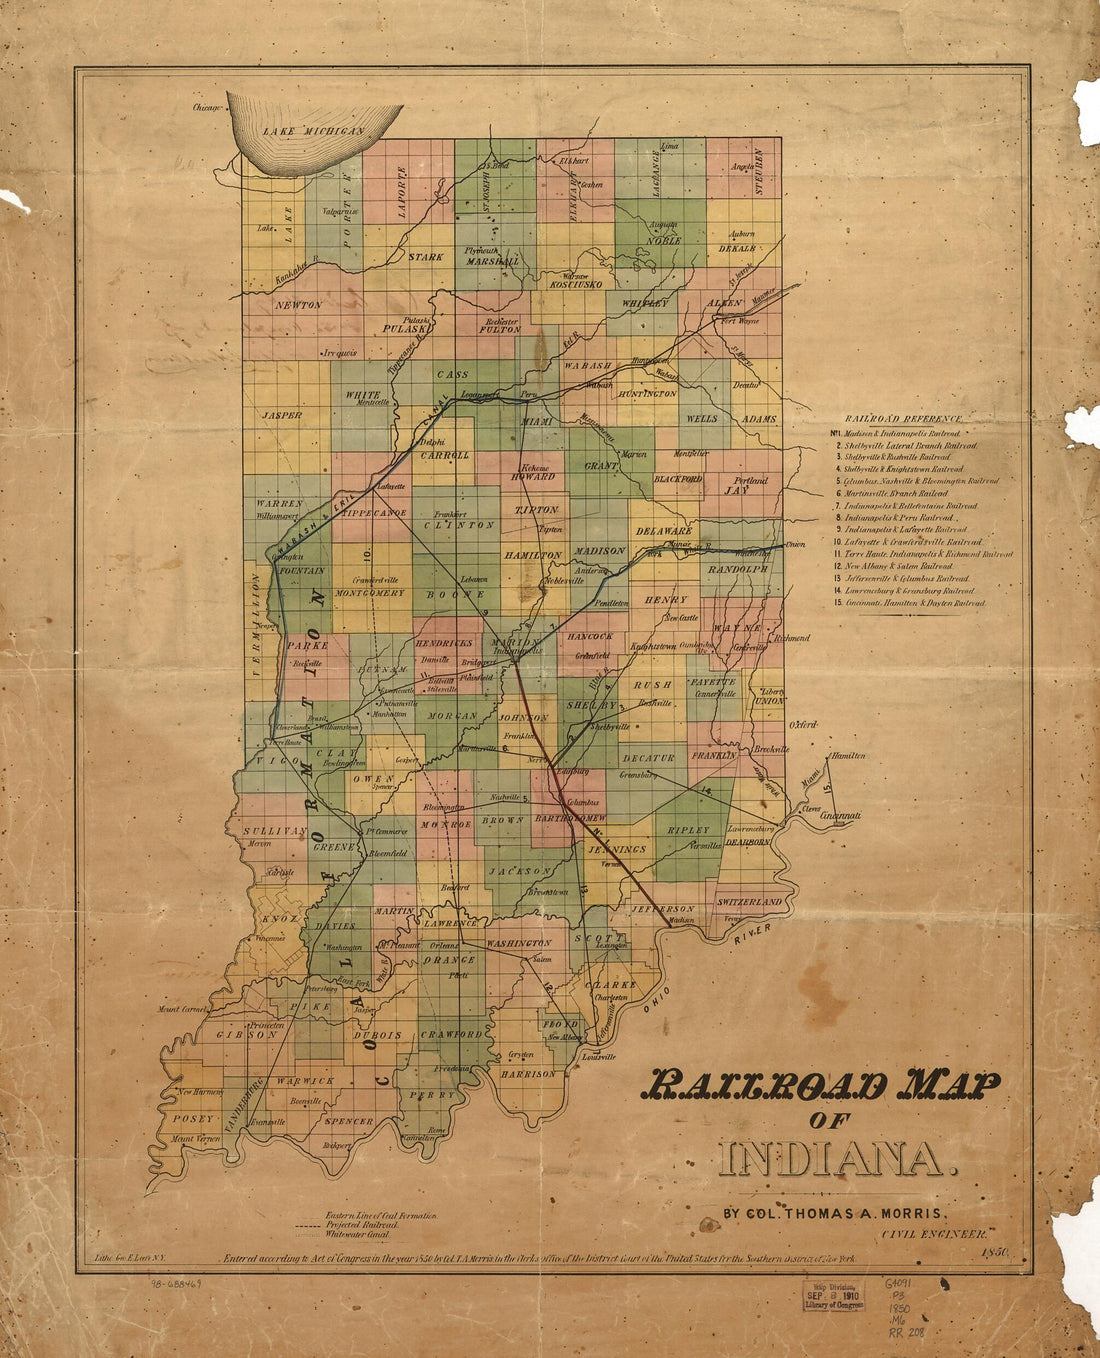 This old map of Railroad Map of Indiana, by Col. Thomas A. Morris, Civil Engineer from 1850 was created by Thomas A. (Thomas Armstrong) Morris in 1850